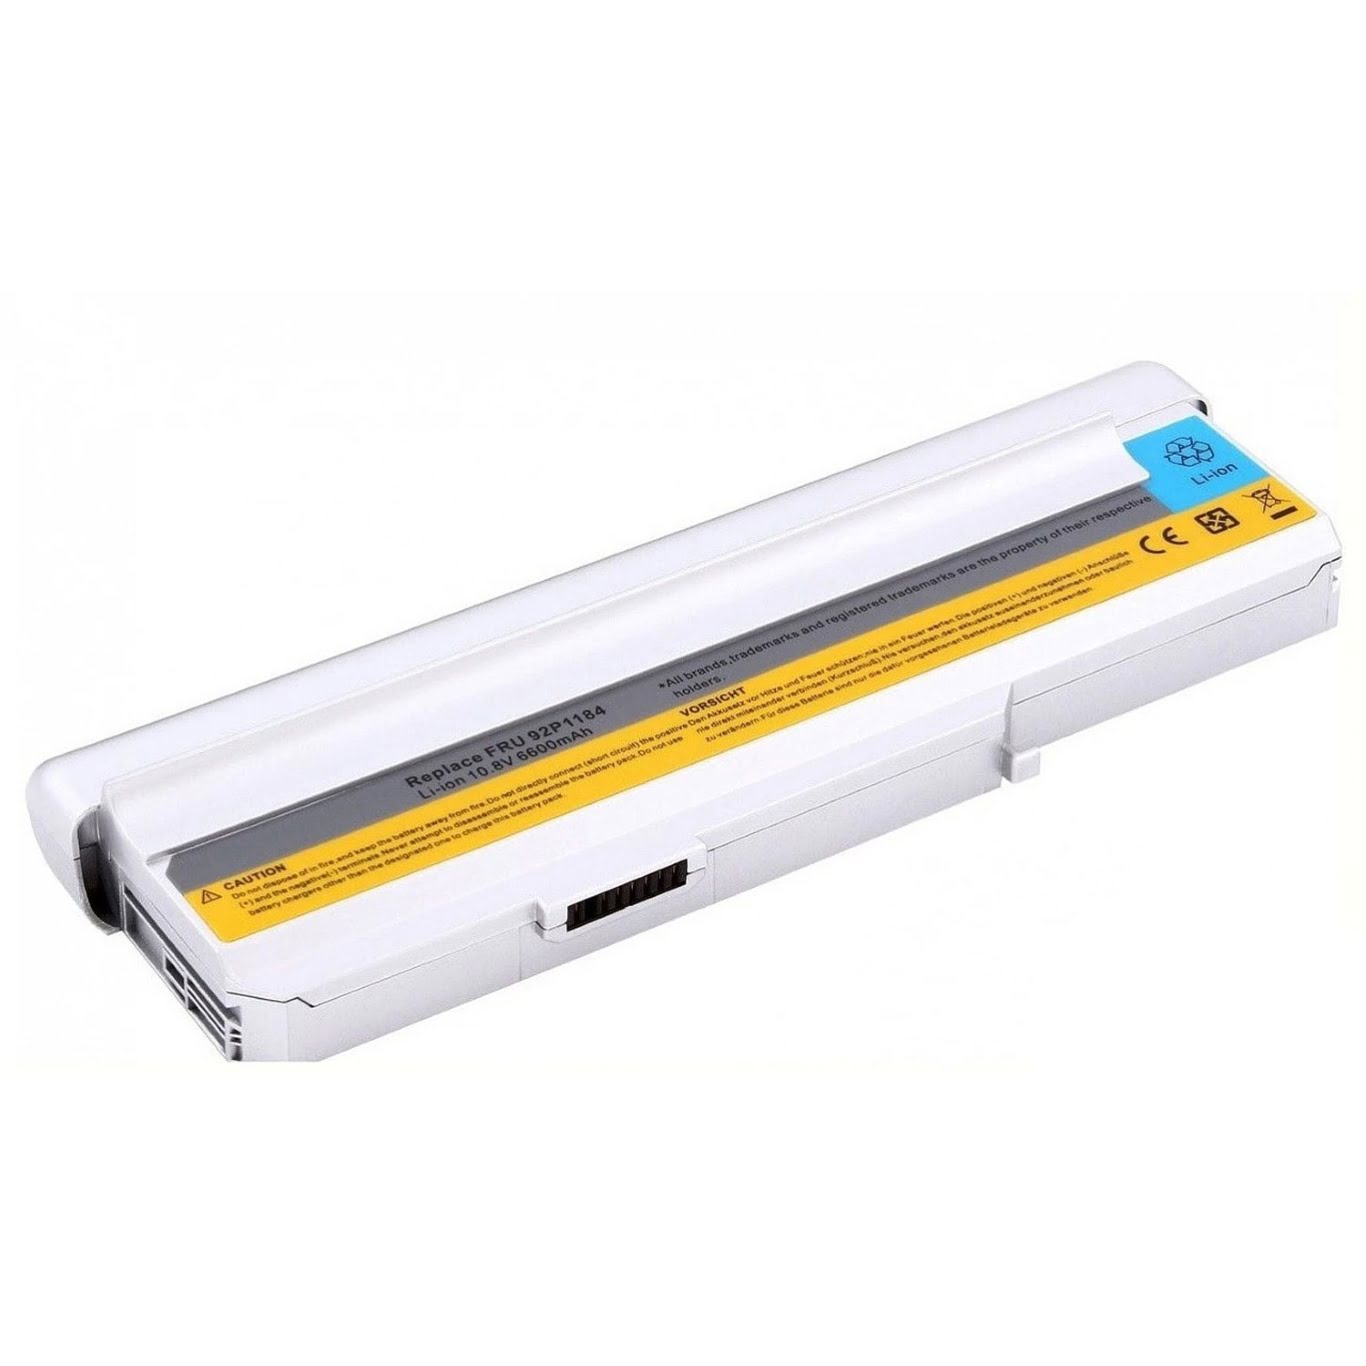 Lenovo 40y8315, 40y8322 Laptop Battery For 3000 C200, 3000 C200 8922 replacement